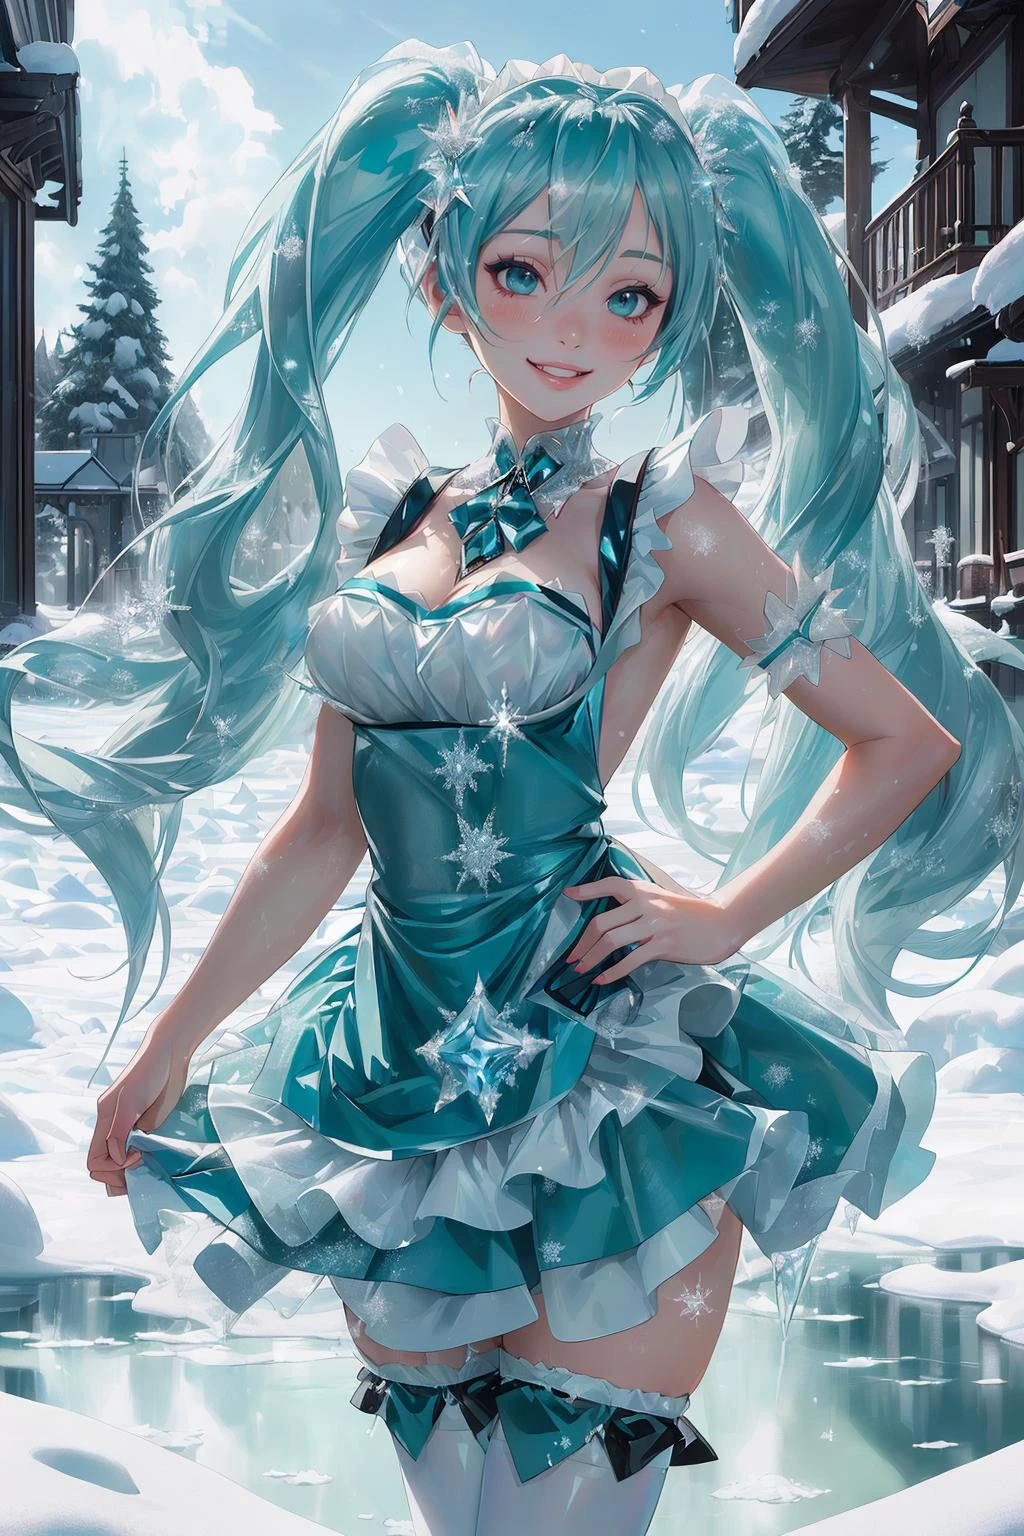 ((MAsterpiece, best quAlity,edgQuAlity,photoreAlistic, hyper reAlistic)),lächelnd,stAnding,posing for A picture,
edgSchürze, edgEis, A (HAtsune Miku, AquA hAir, twin tAils) in A Apron,Eis,snow flAkes ,weAring edgEis edgSchürze
 